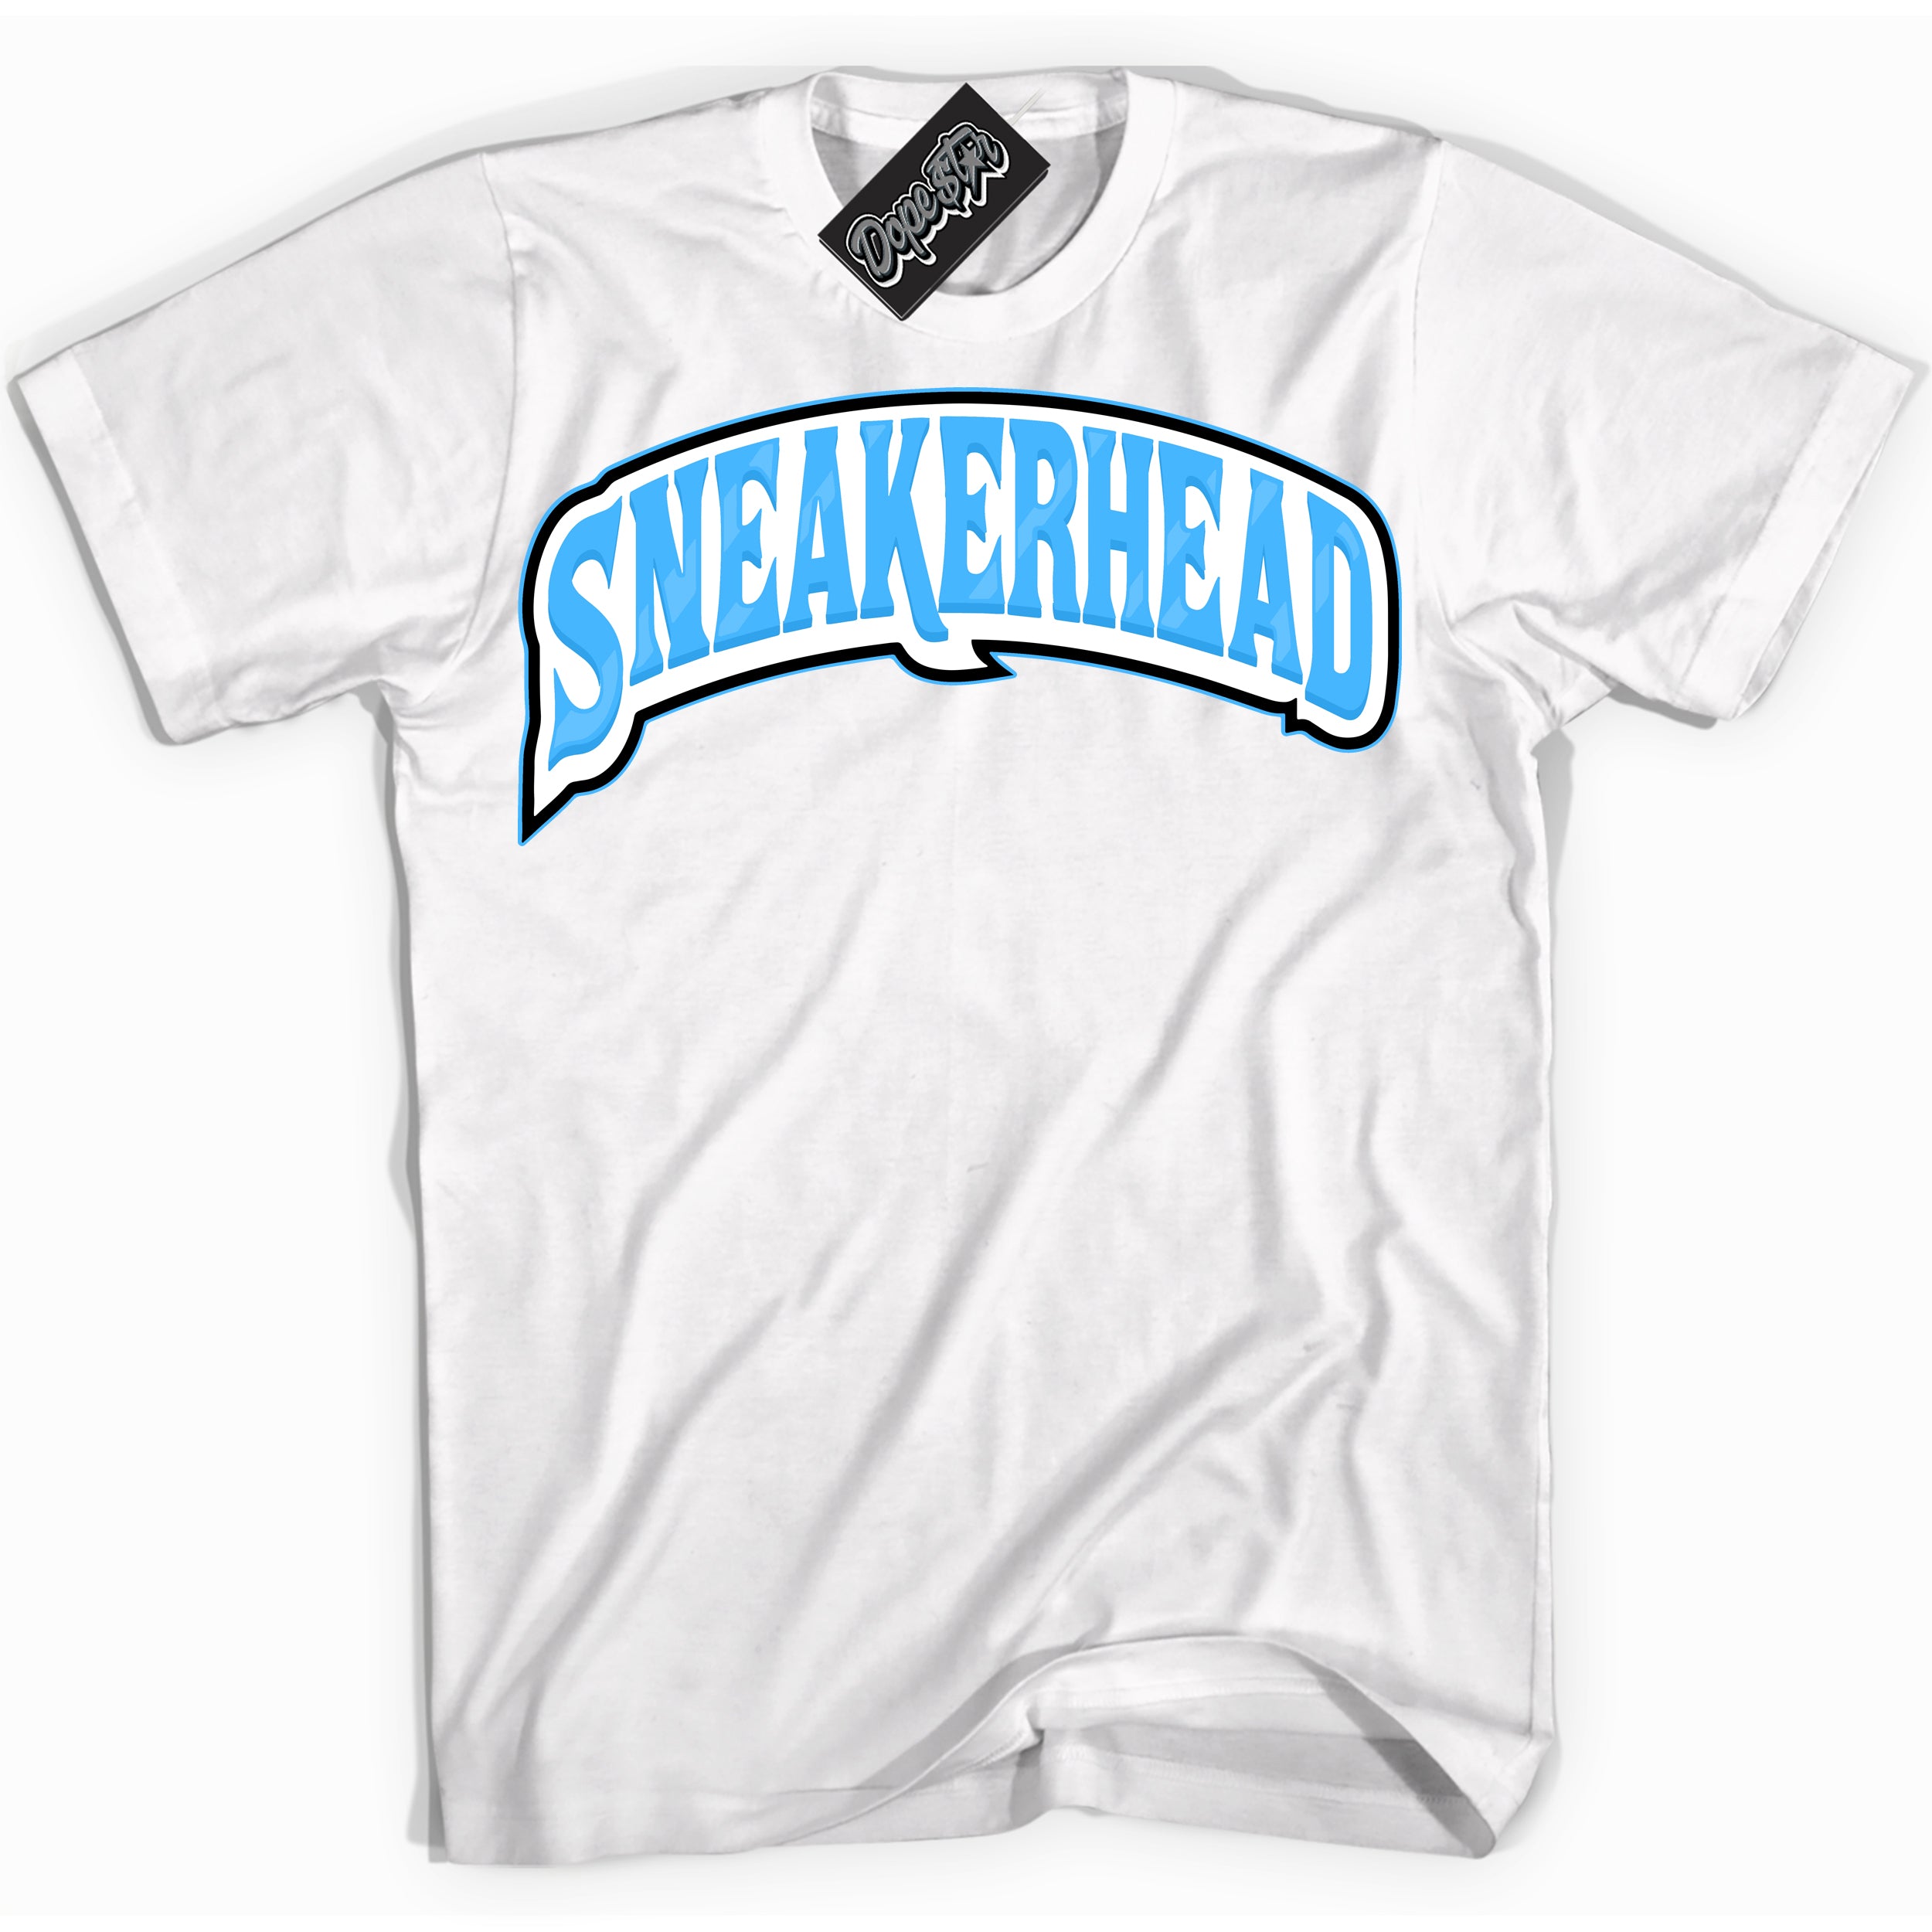 Cool White graphic tee with “ Sneakerhead” design, that perfectly matches Powder Blue 9s sneakers 